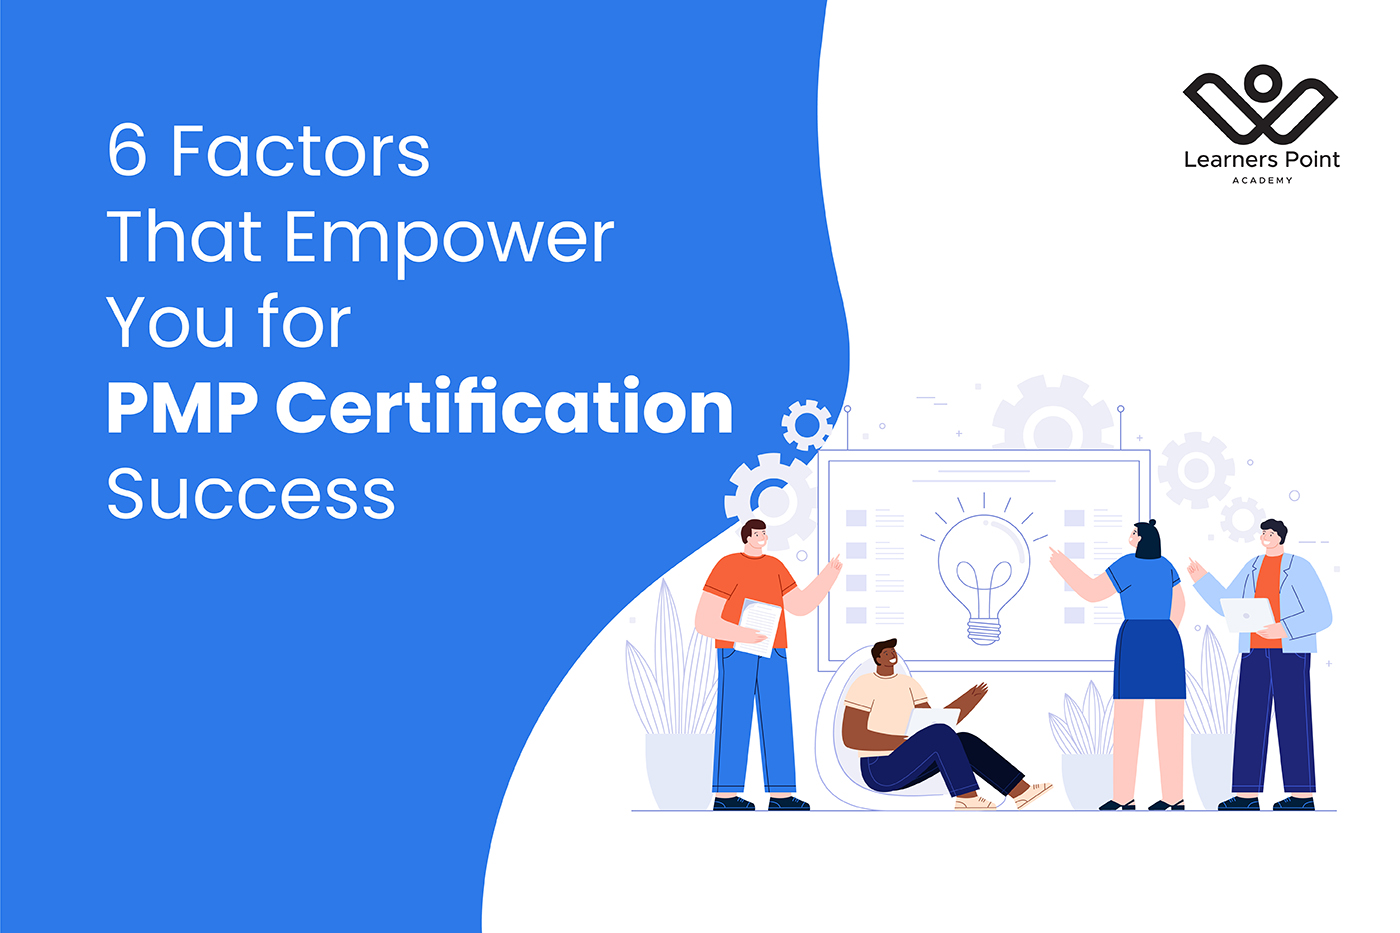 6 Factors That Empower You for PMP Certification Success